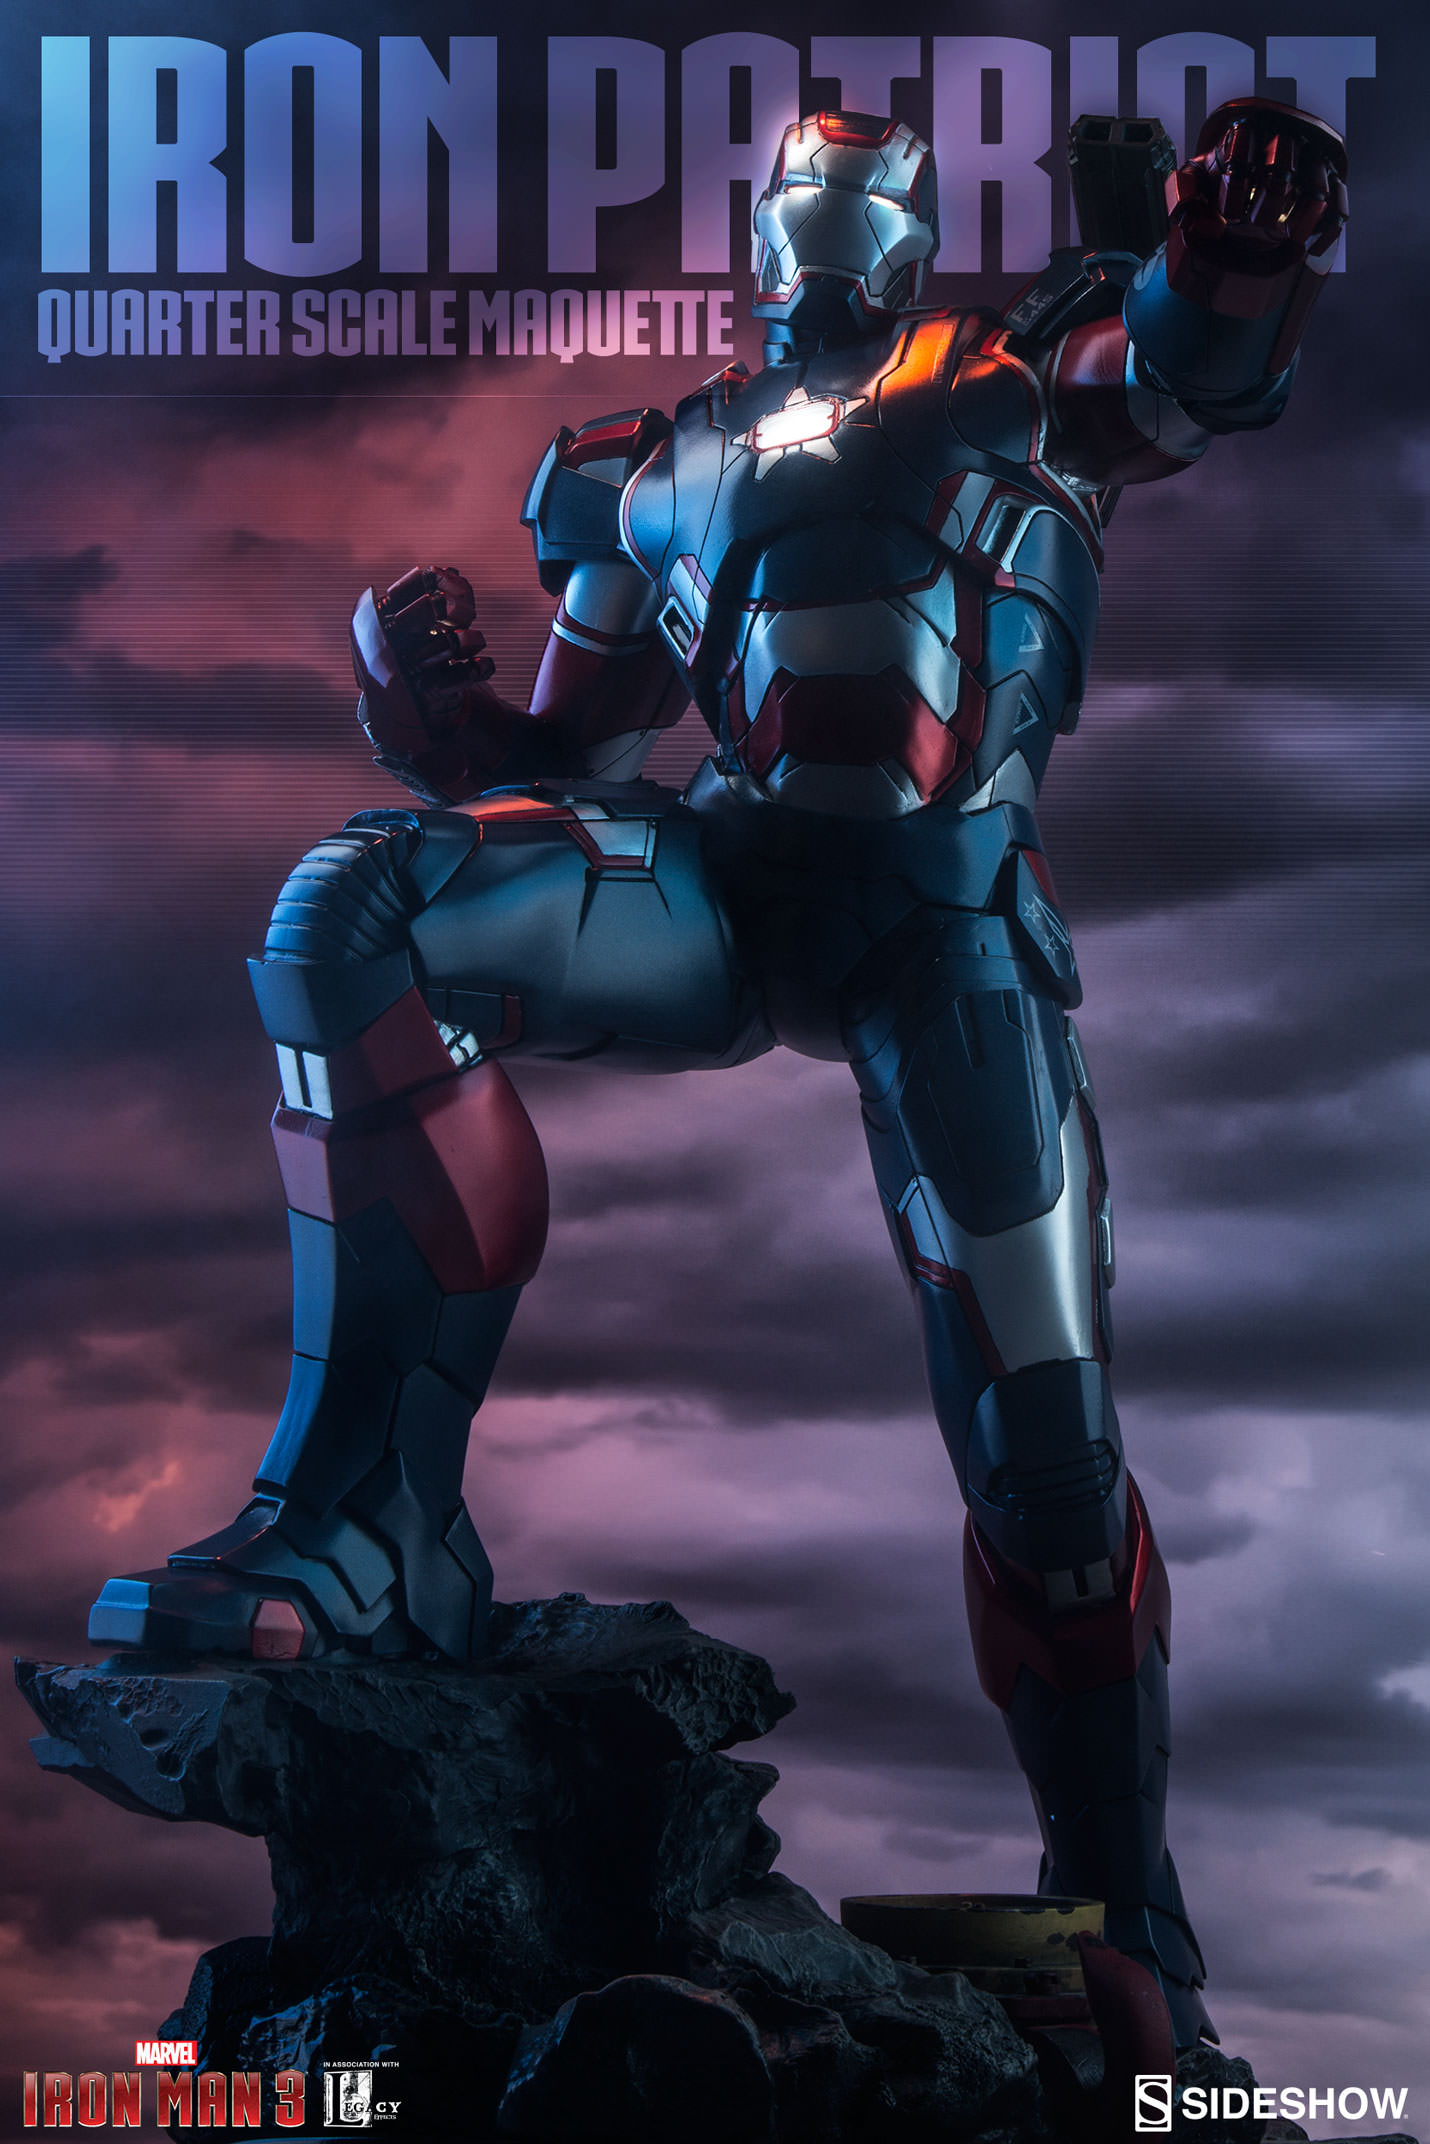 Iron Patriot Quarter Scale Maquette by Sideshow Collectibles